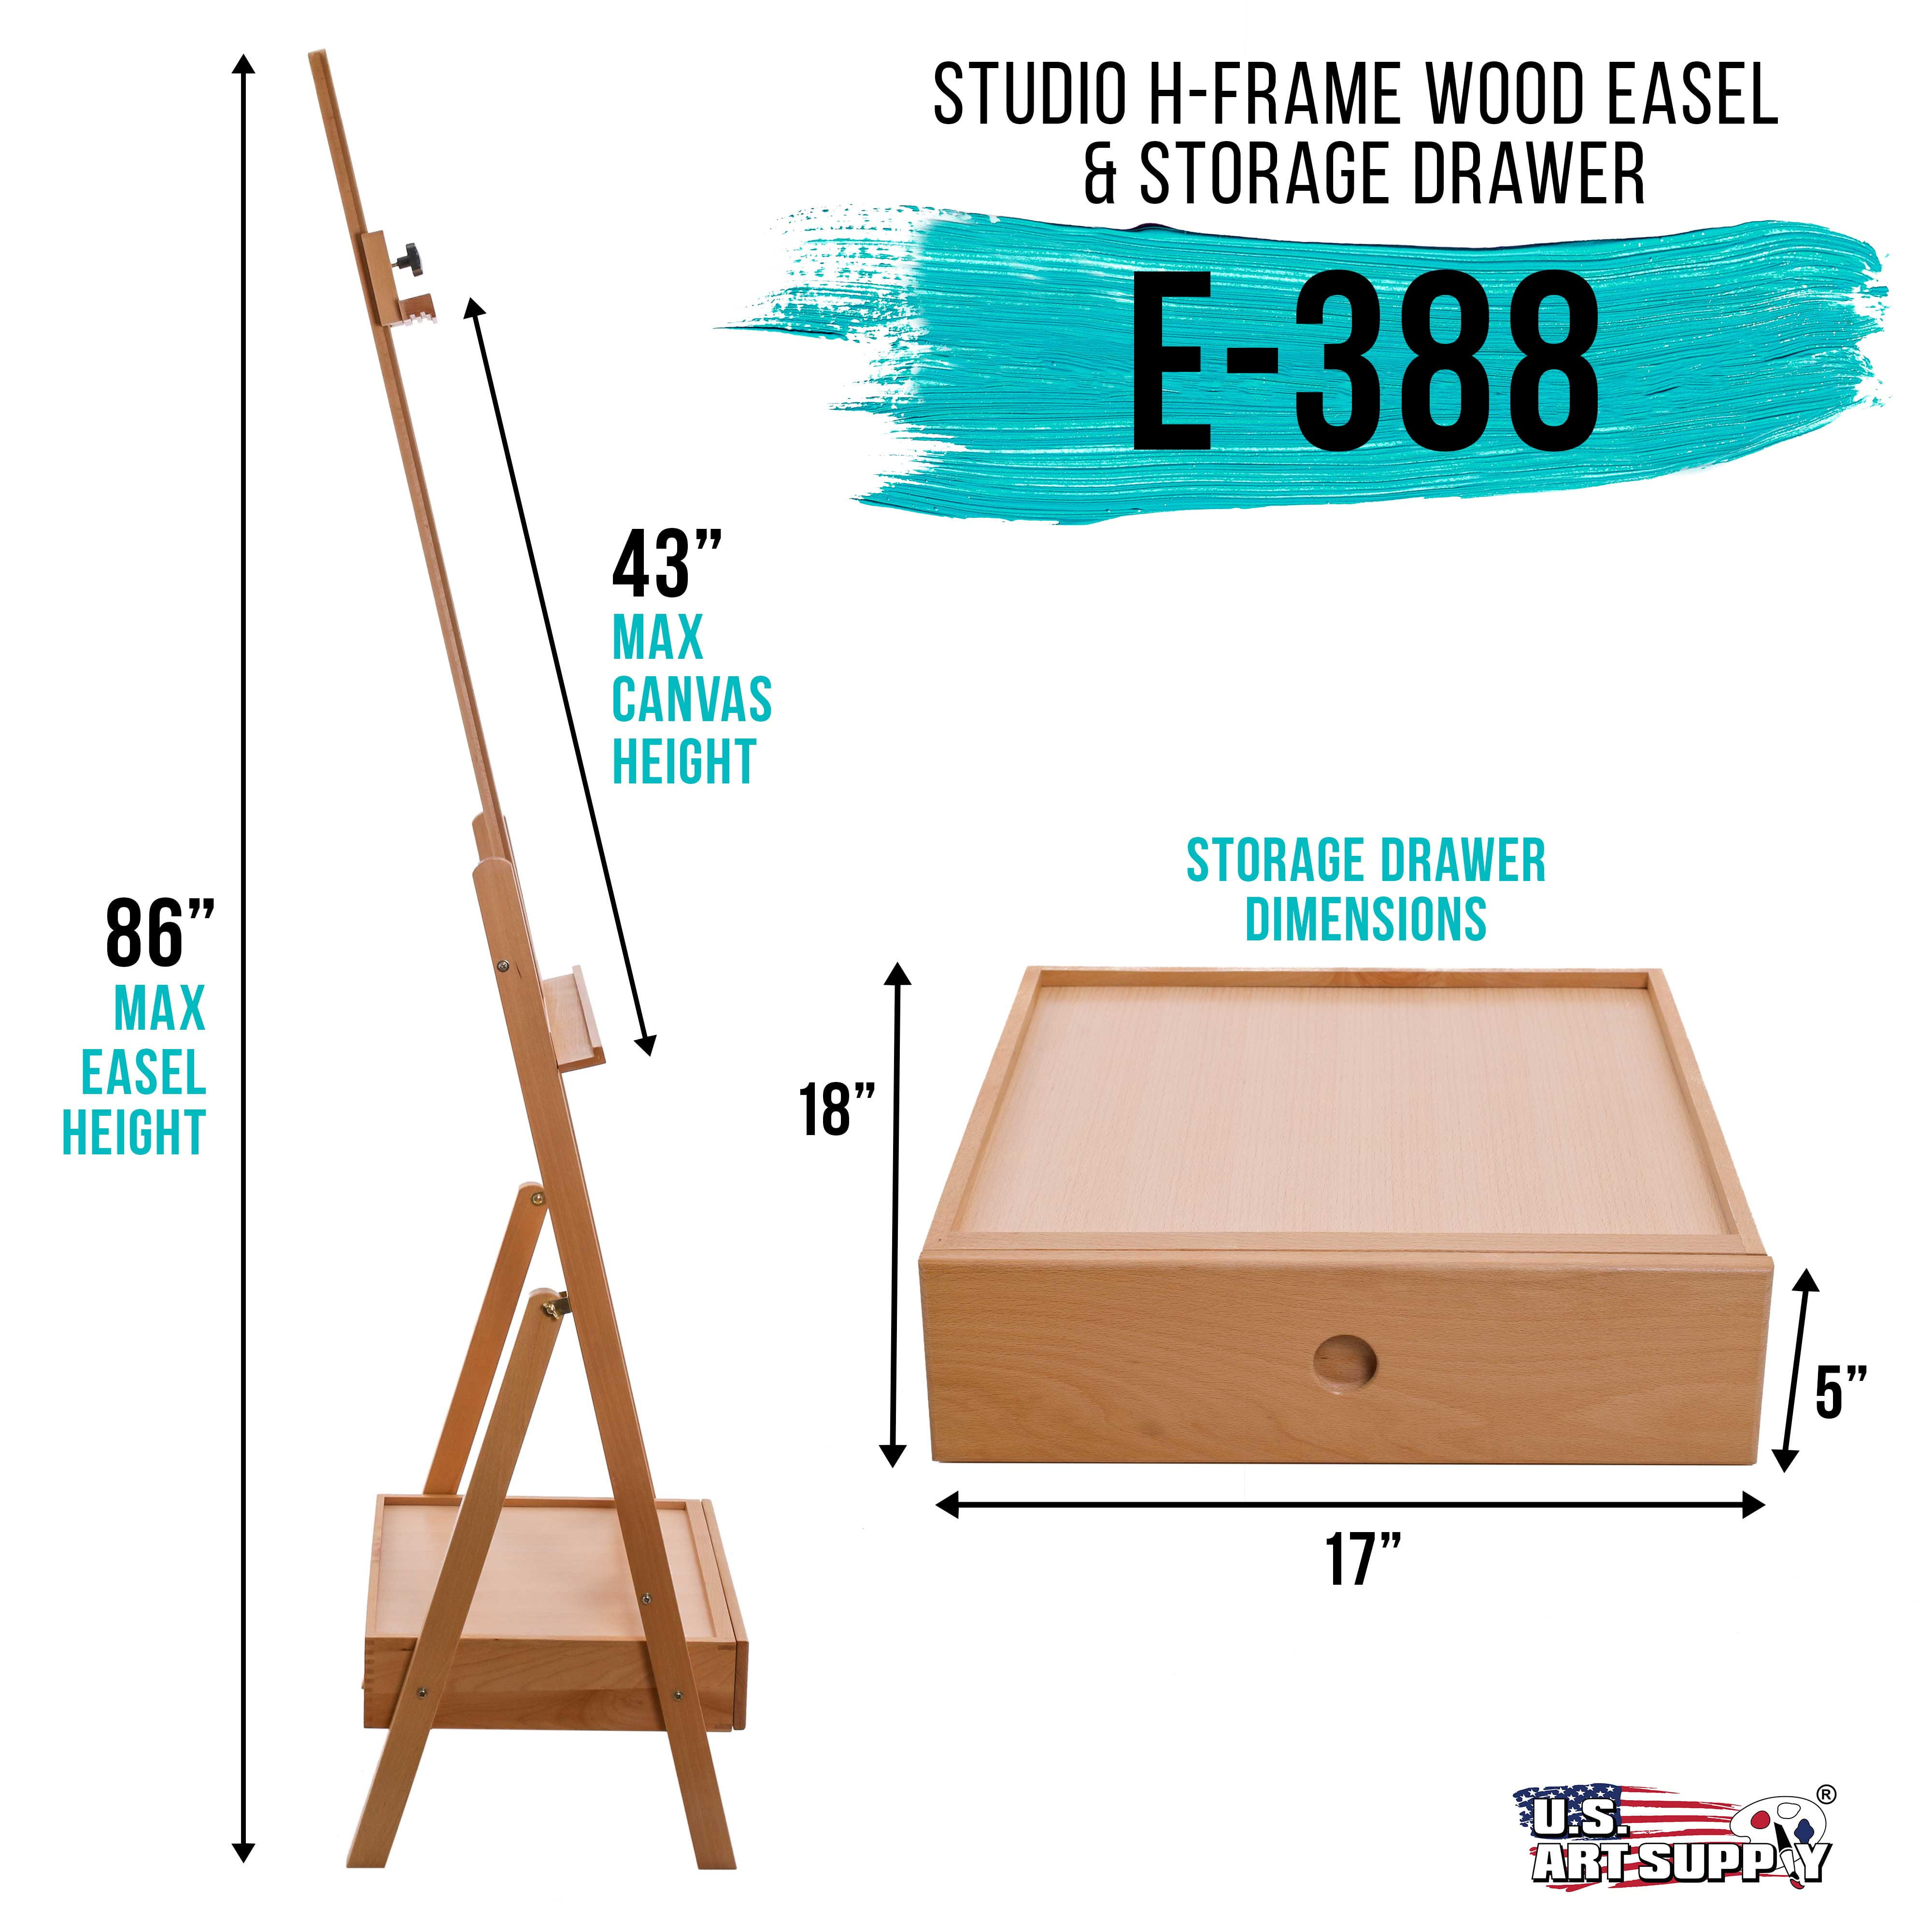 Rocker Crank Wooden Adjustable Studio Easel - Extra Large Heavy Duty  H-Frame, Mast to 132, Canvas to 81, Artist Storage Tray, Drawers -  Beechwood